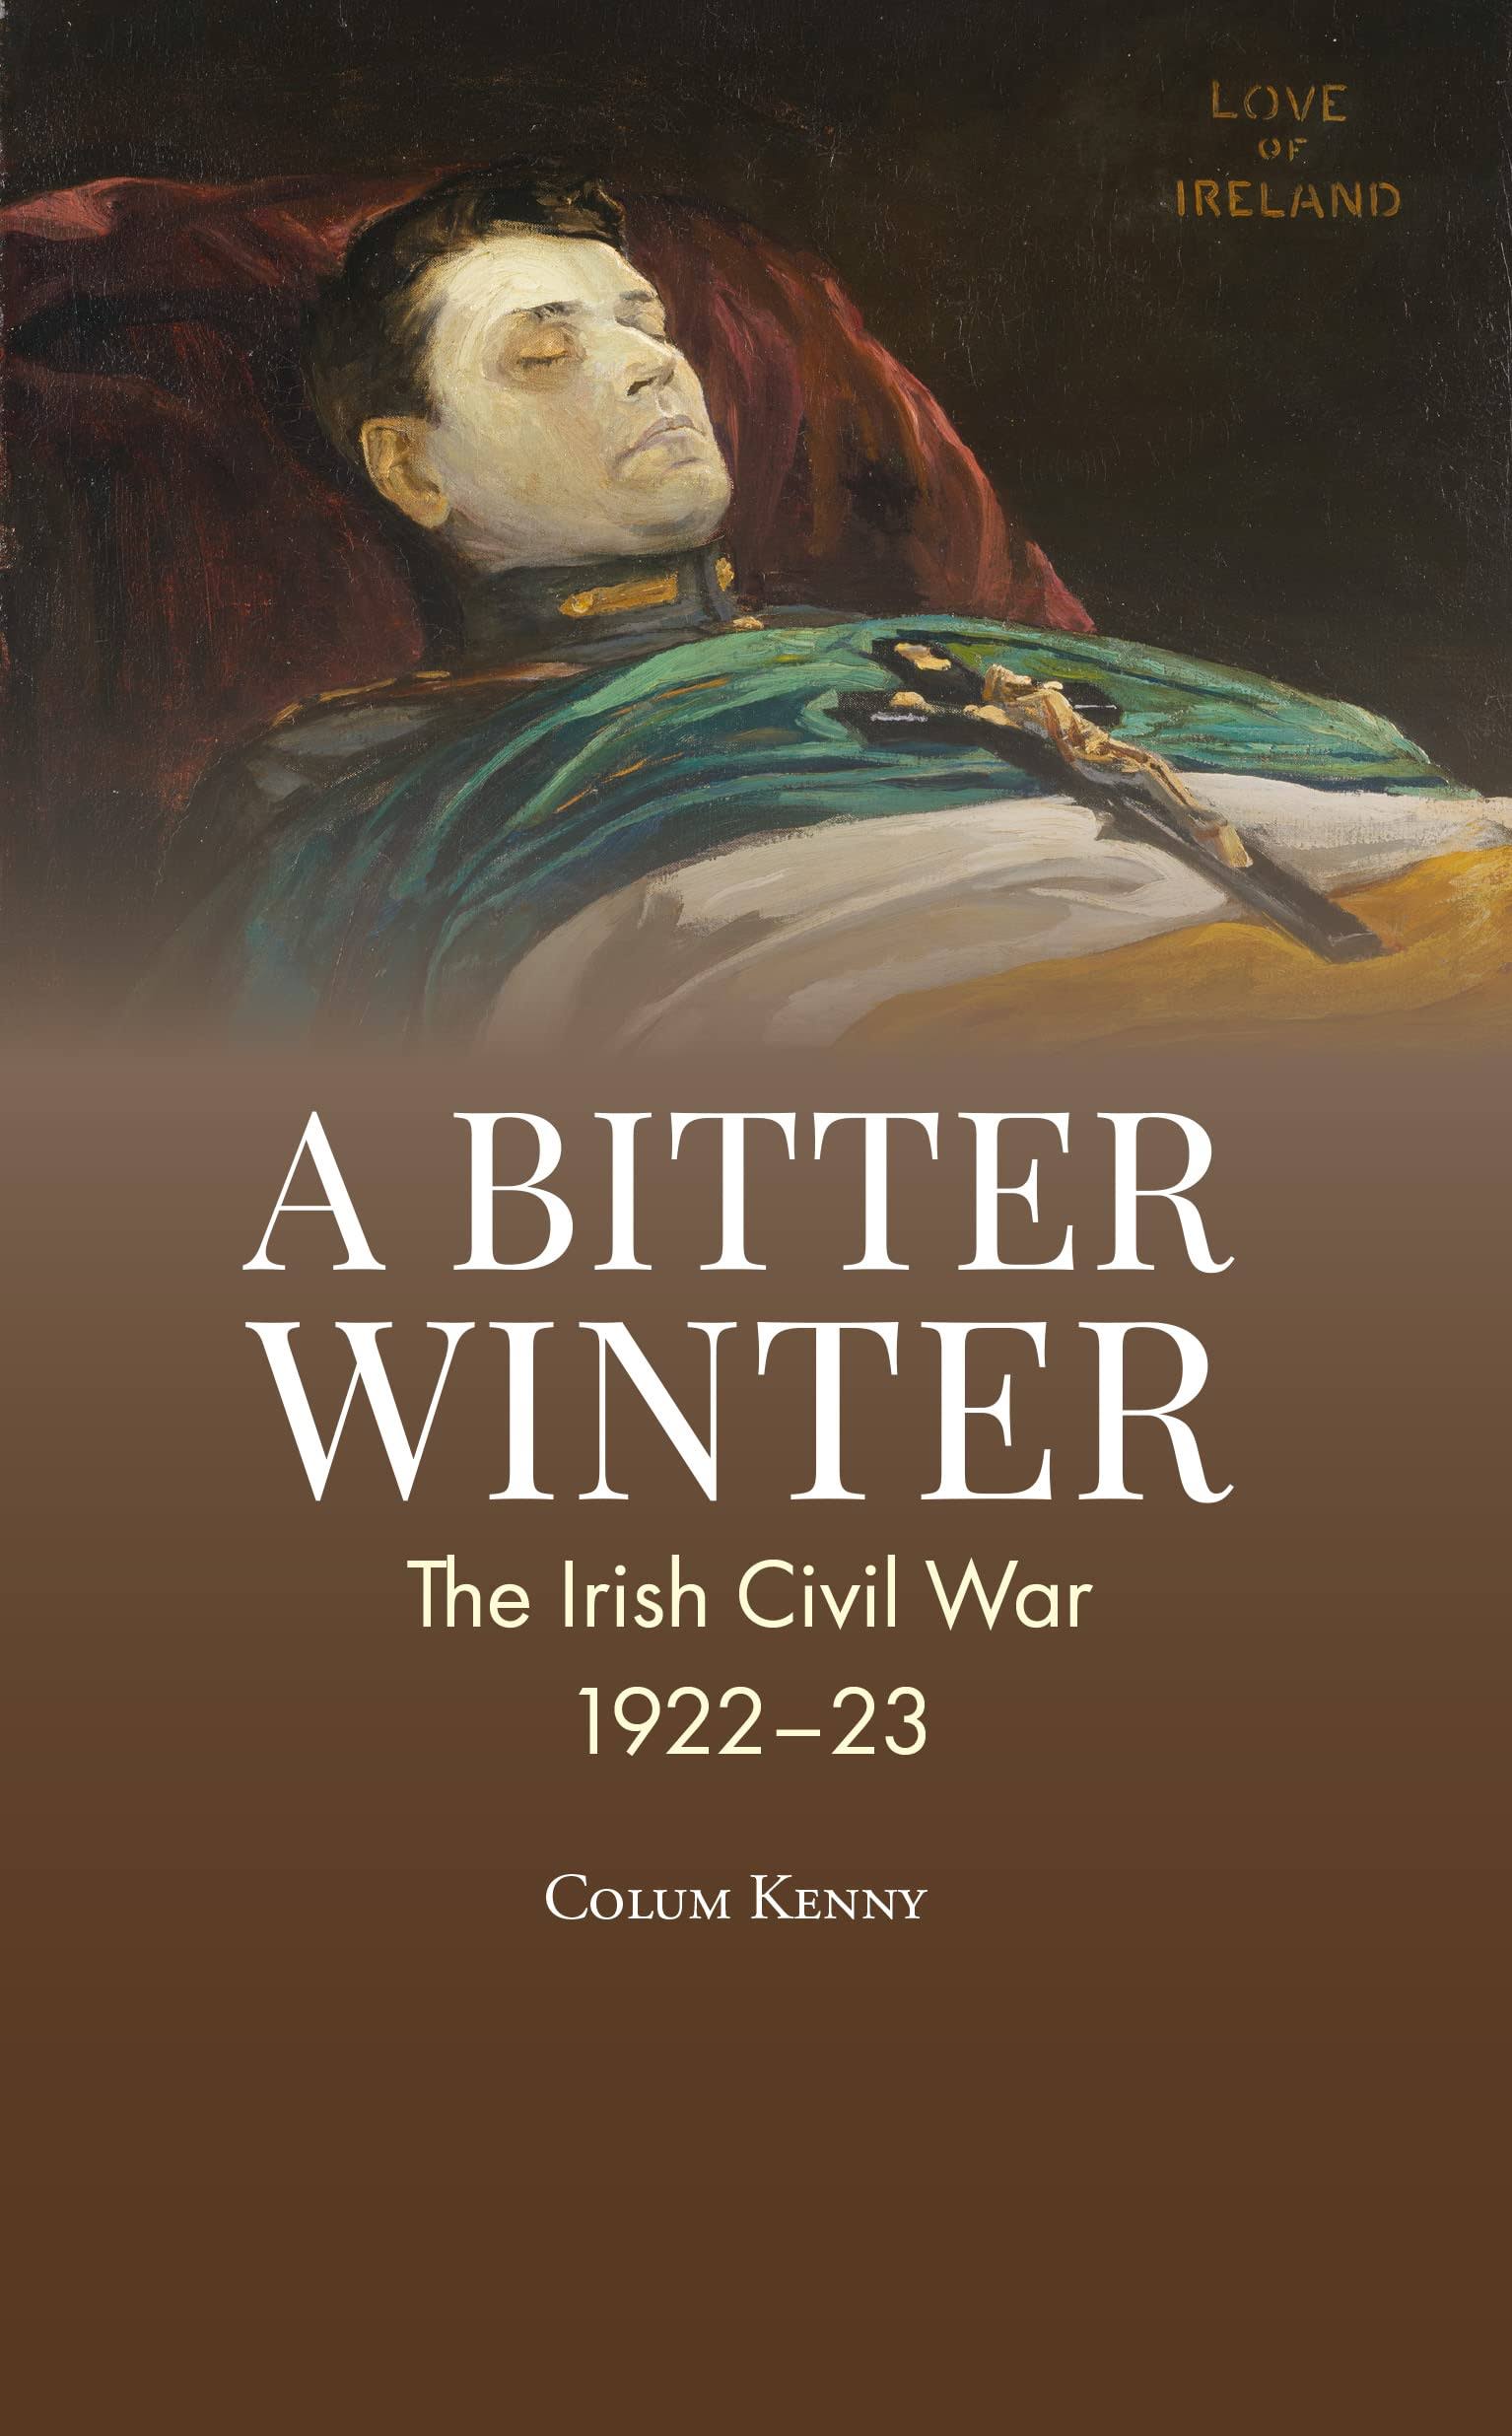 A Bitter Winter 2022 by Colum Kenny